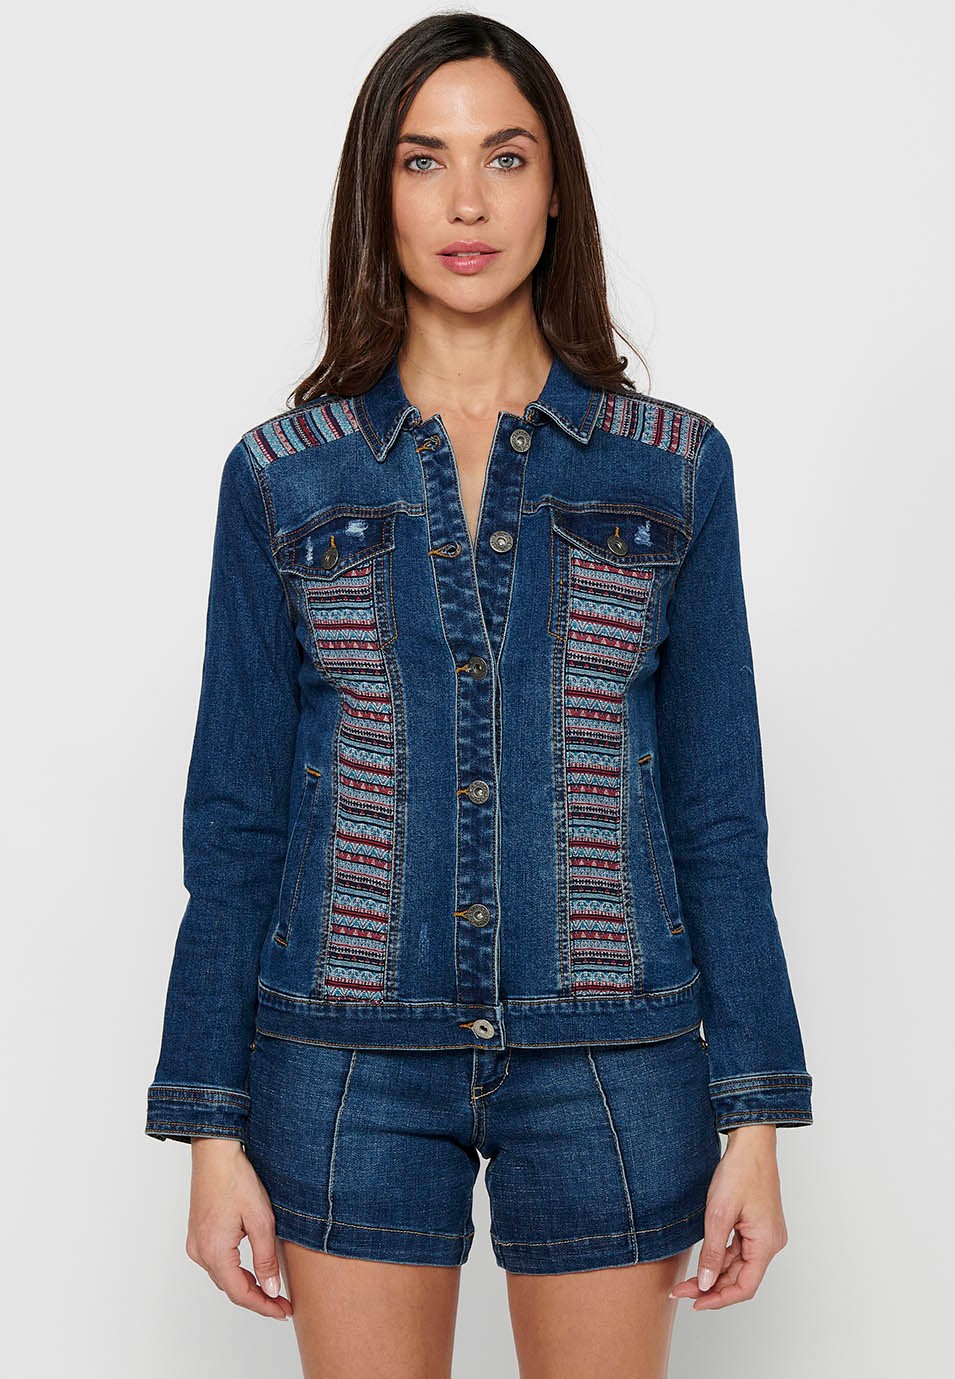 Long-sleeved denim jacket with ethnic fabric detail and front closure with blue buttons for women 8